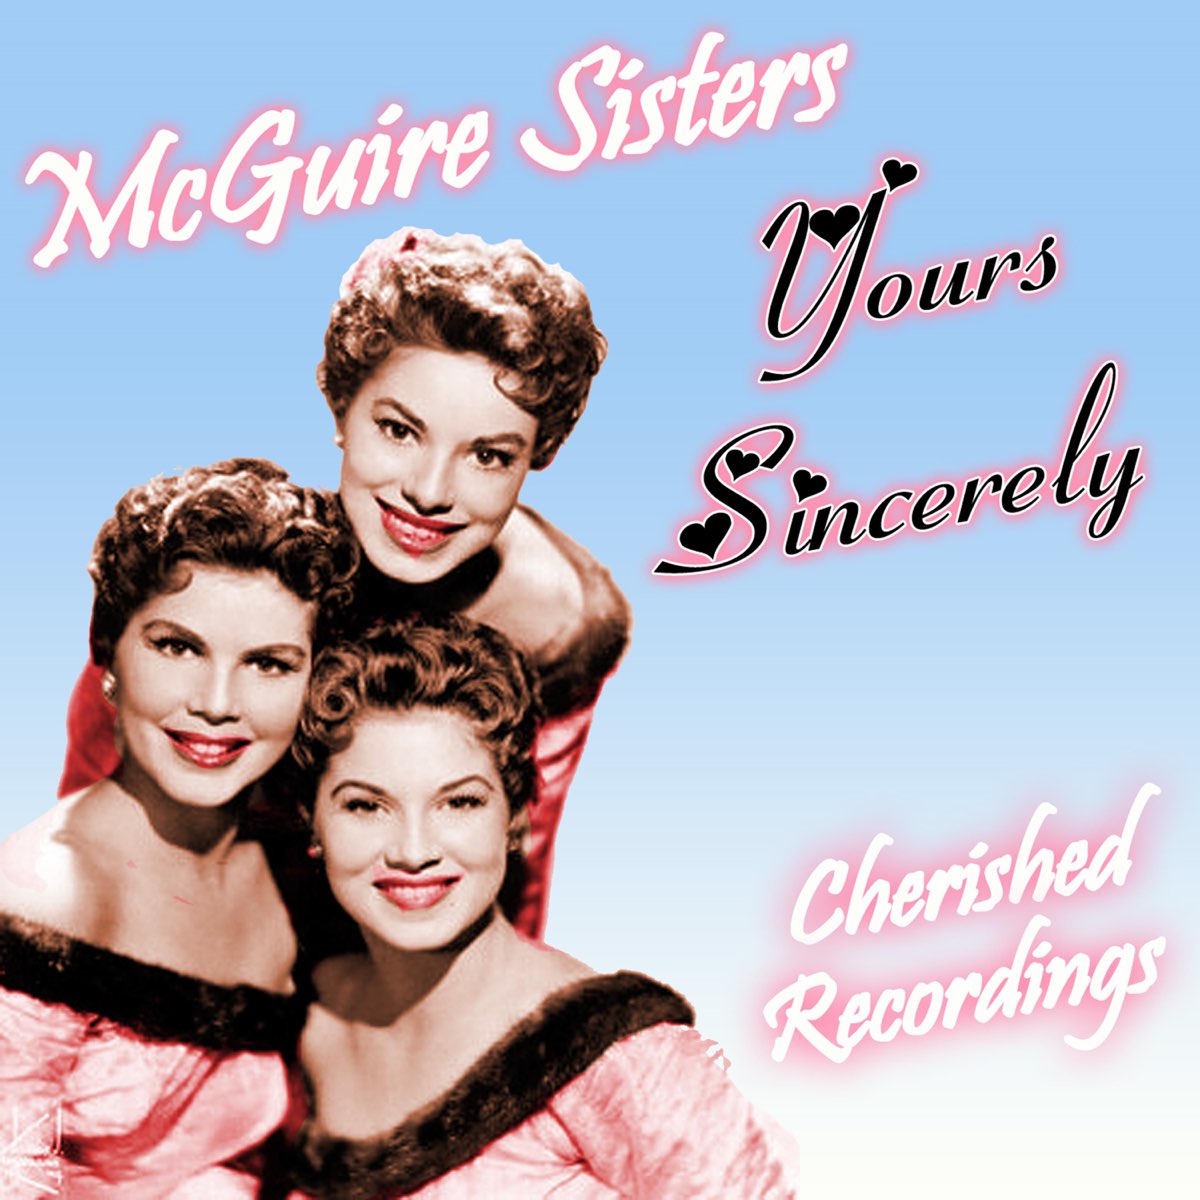 Sisters текст. MCGUIRE sisters Picnic 1956. True sisters. The Puppini sisters. 23 sisters